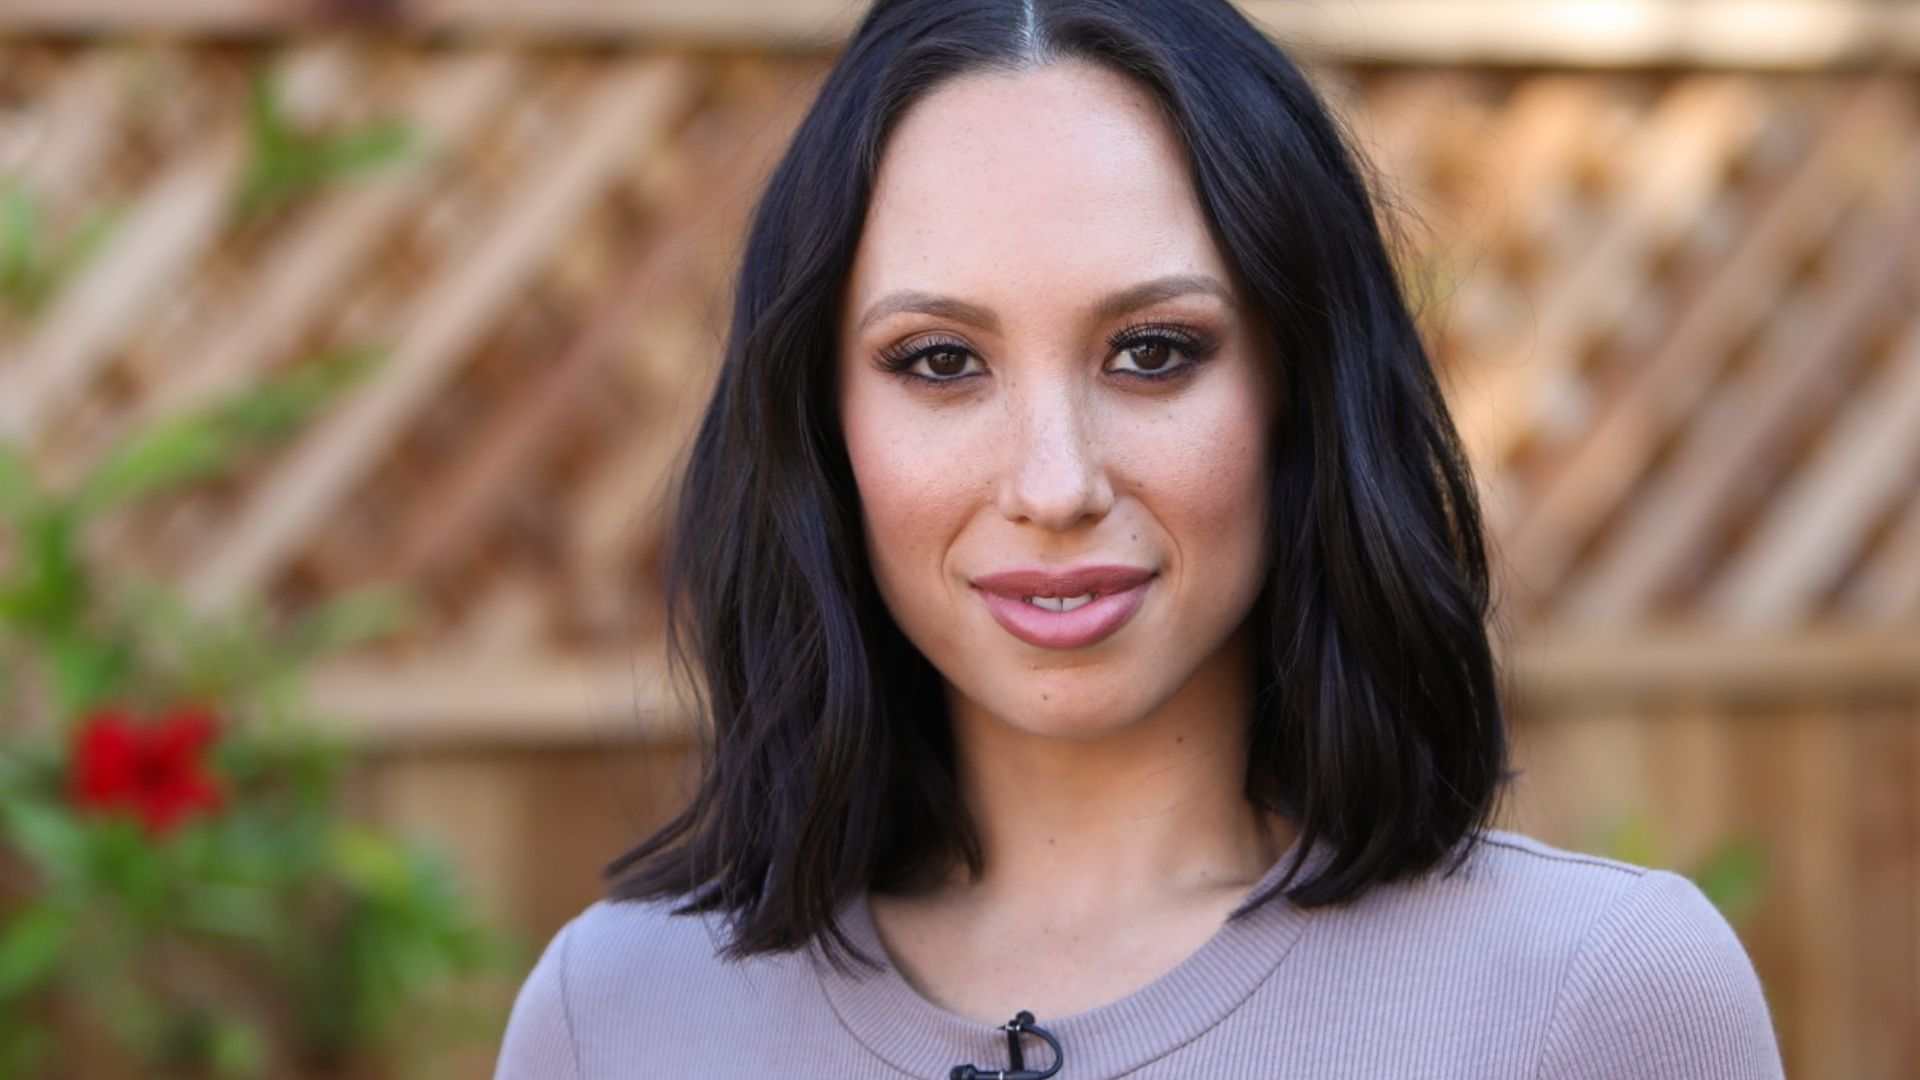 Dancing with the Stars professional Cheryl Burke breaks silence as she confirms divorce